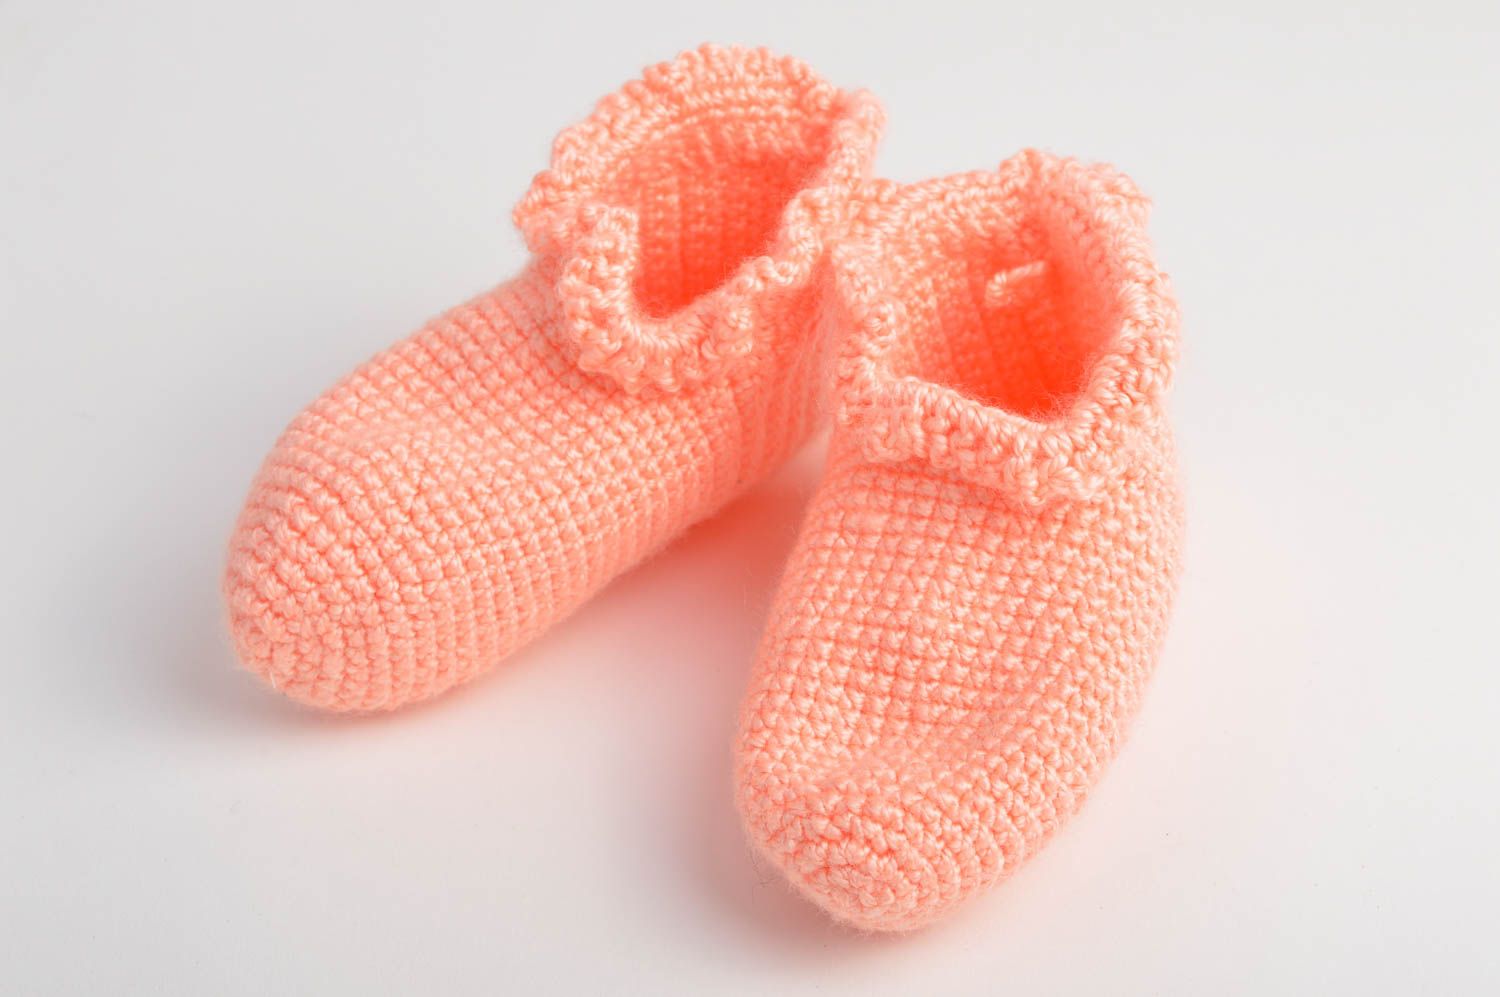 Hand crocheted baby shoes crochet baby booties baby socks kids accessories photo 4